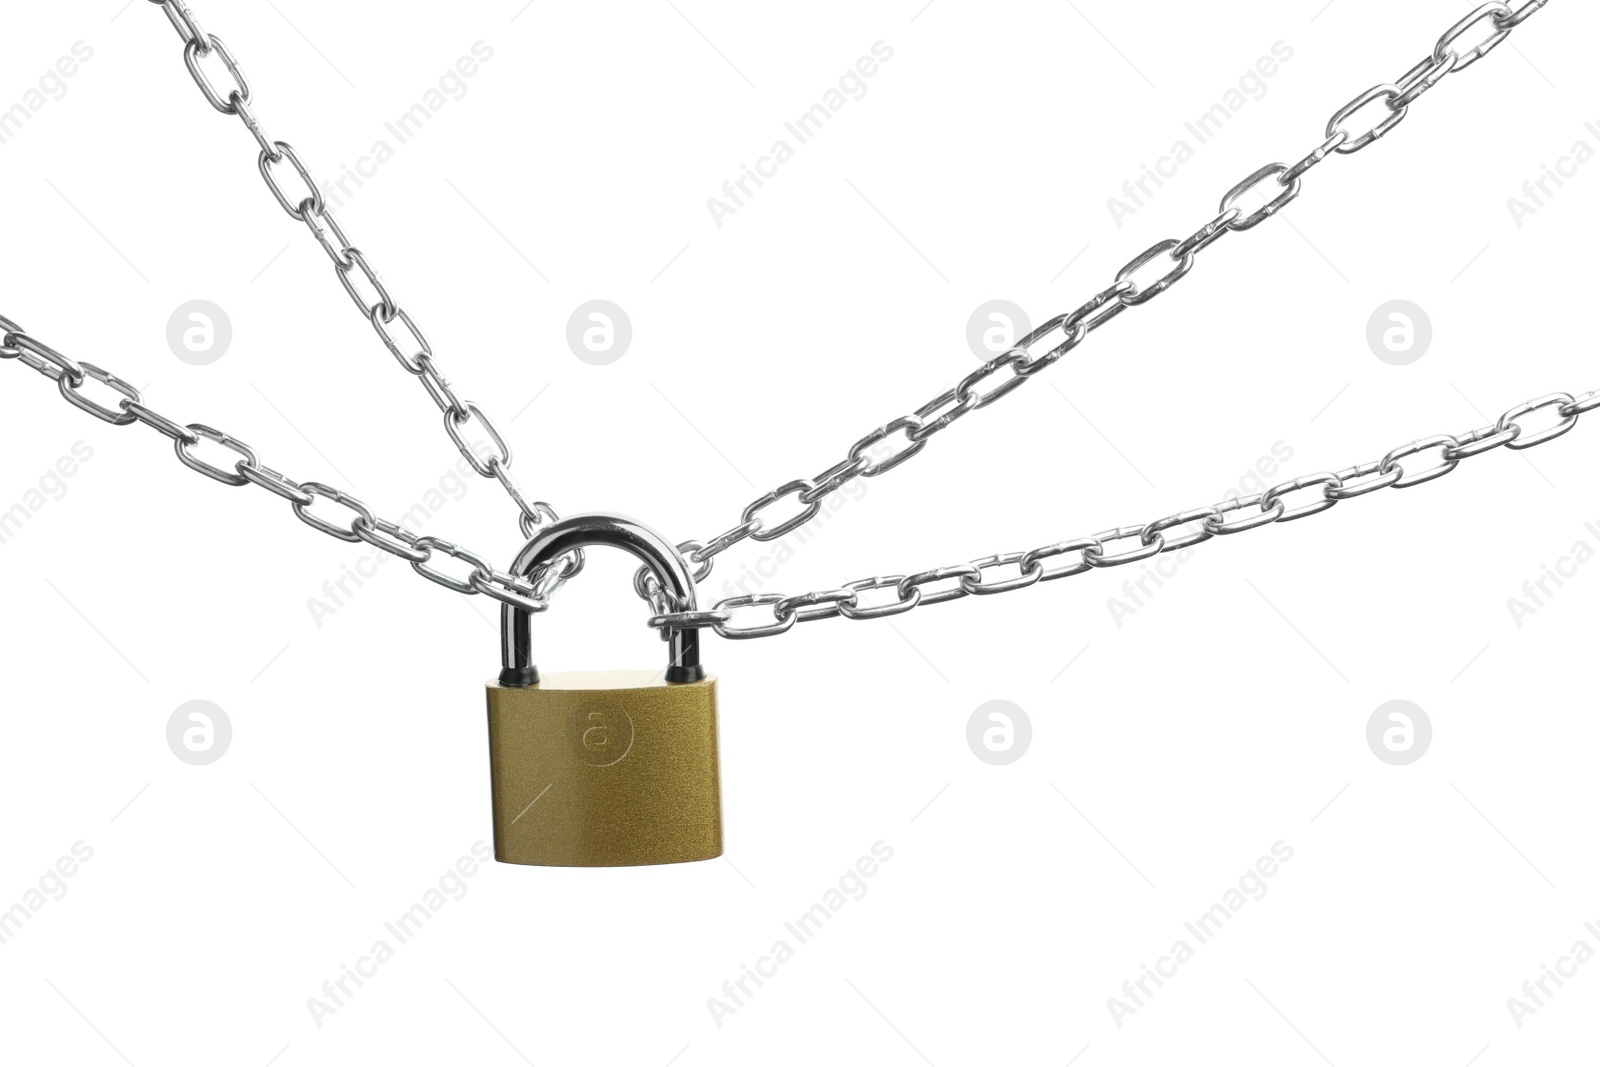 Photo of Steel padlock and chains isolated on white, top view. Safety concept